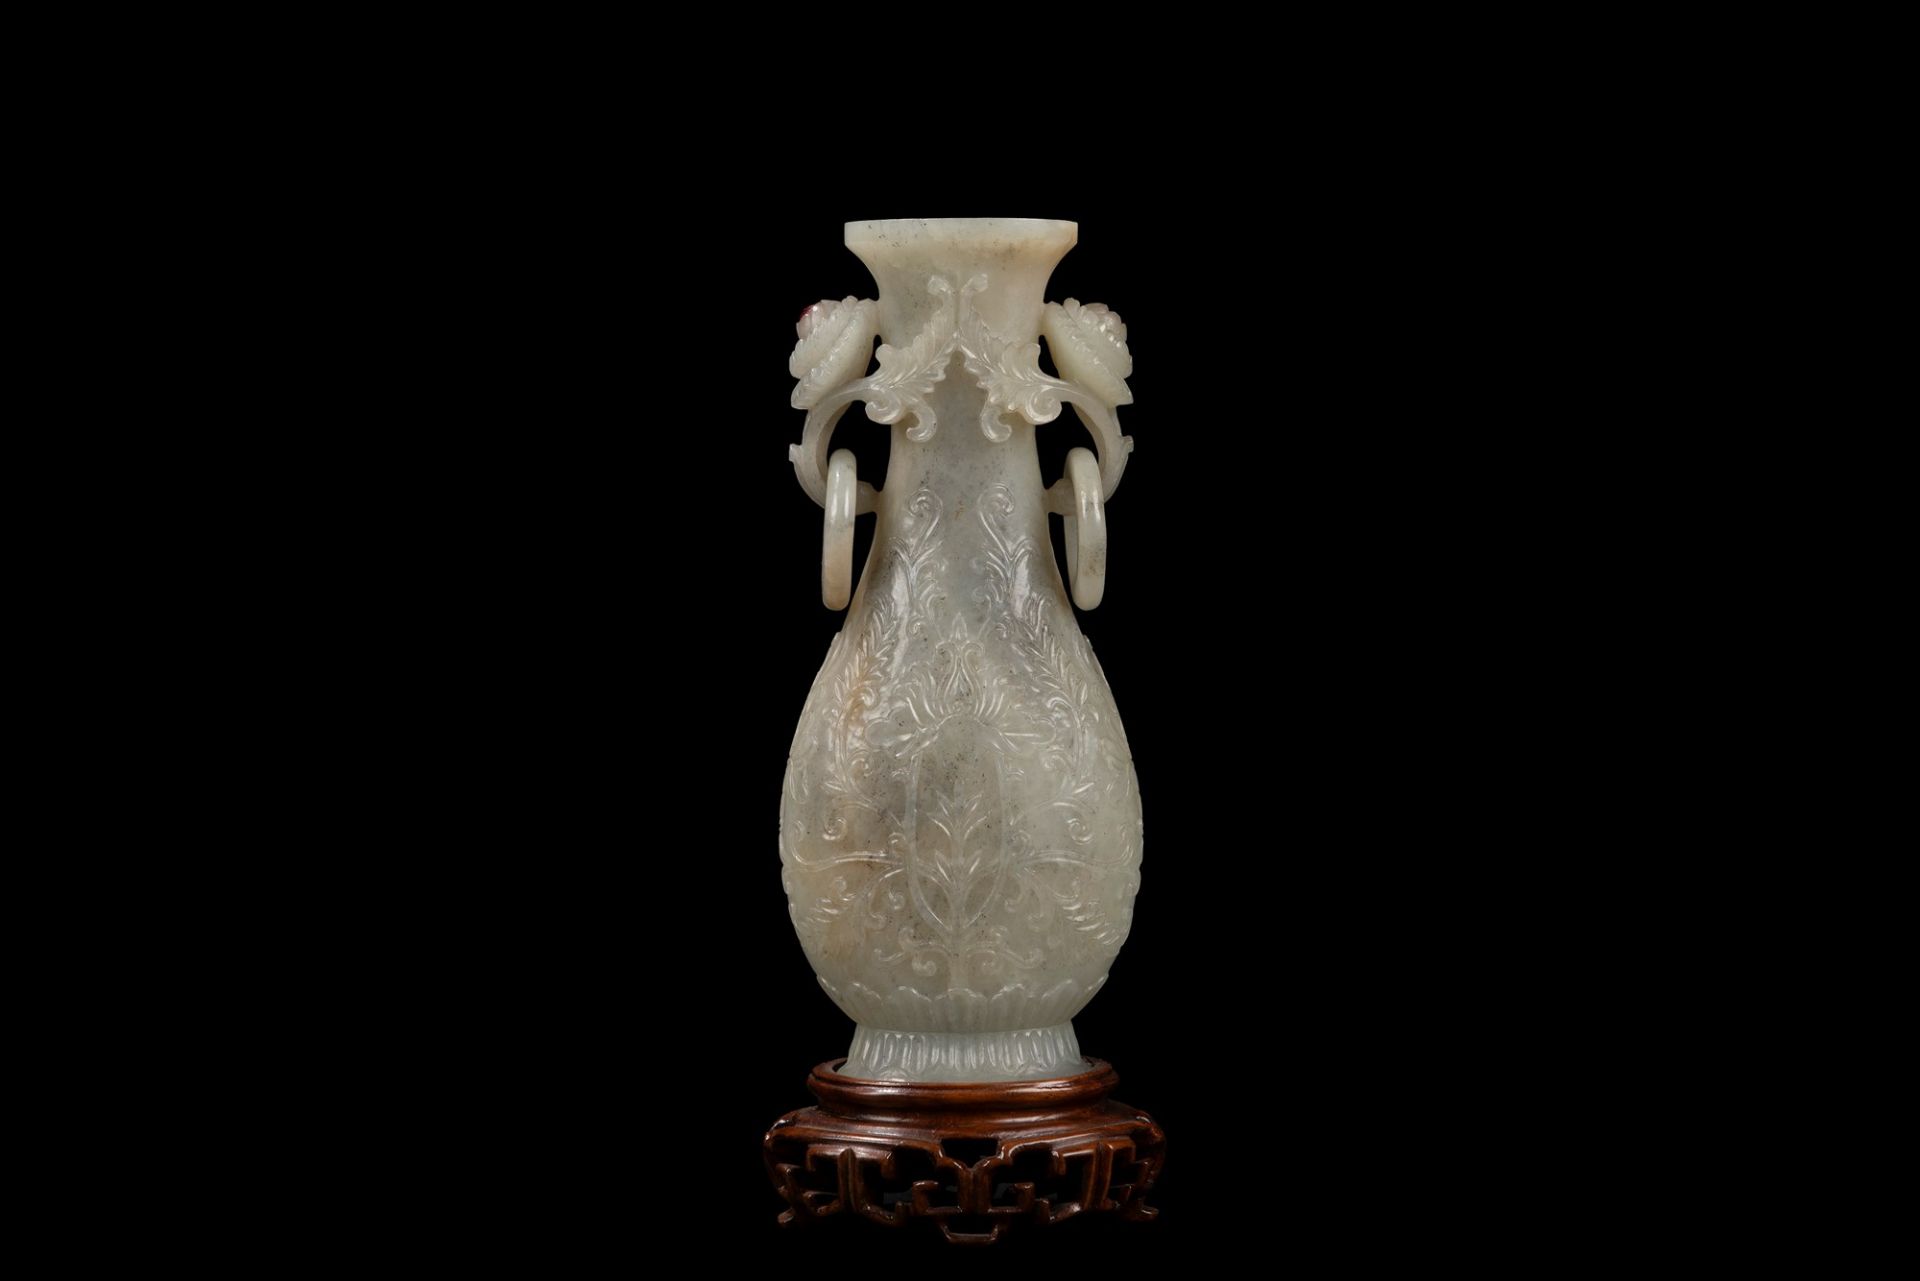 A CHINESE MUGHAL STYLE CARVED CELADON JADE ELONGATED VASE, China, Qing dynasty, 19th / 20th century